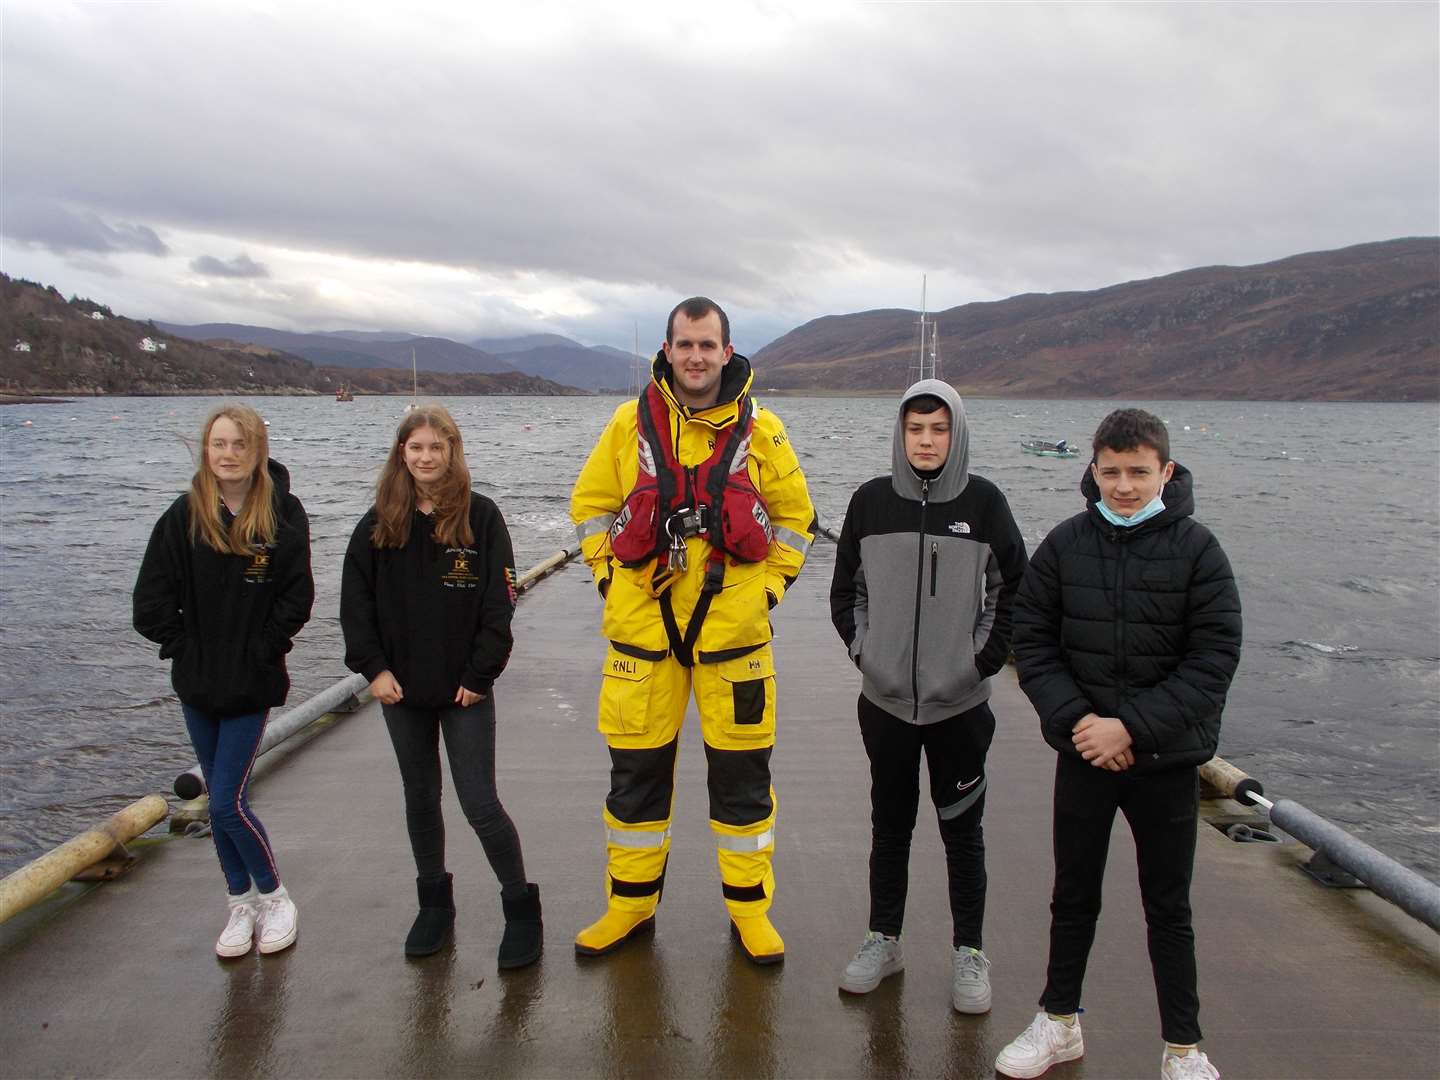 Millie, Poppy, Fionn and Lewin from the winning team, together with Joe Mackay fromthe Lochinver lifeboat crew and staff from Ullapool High School.